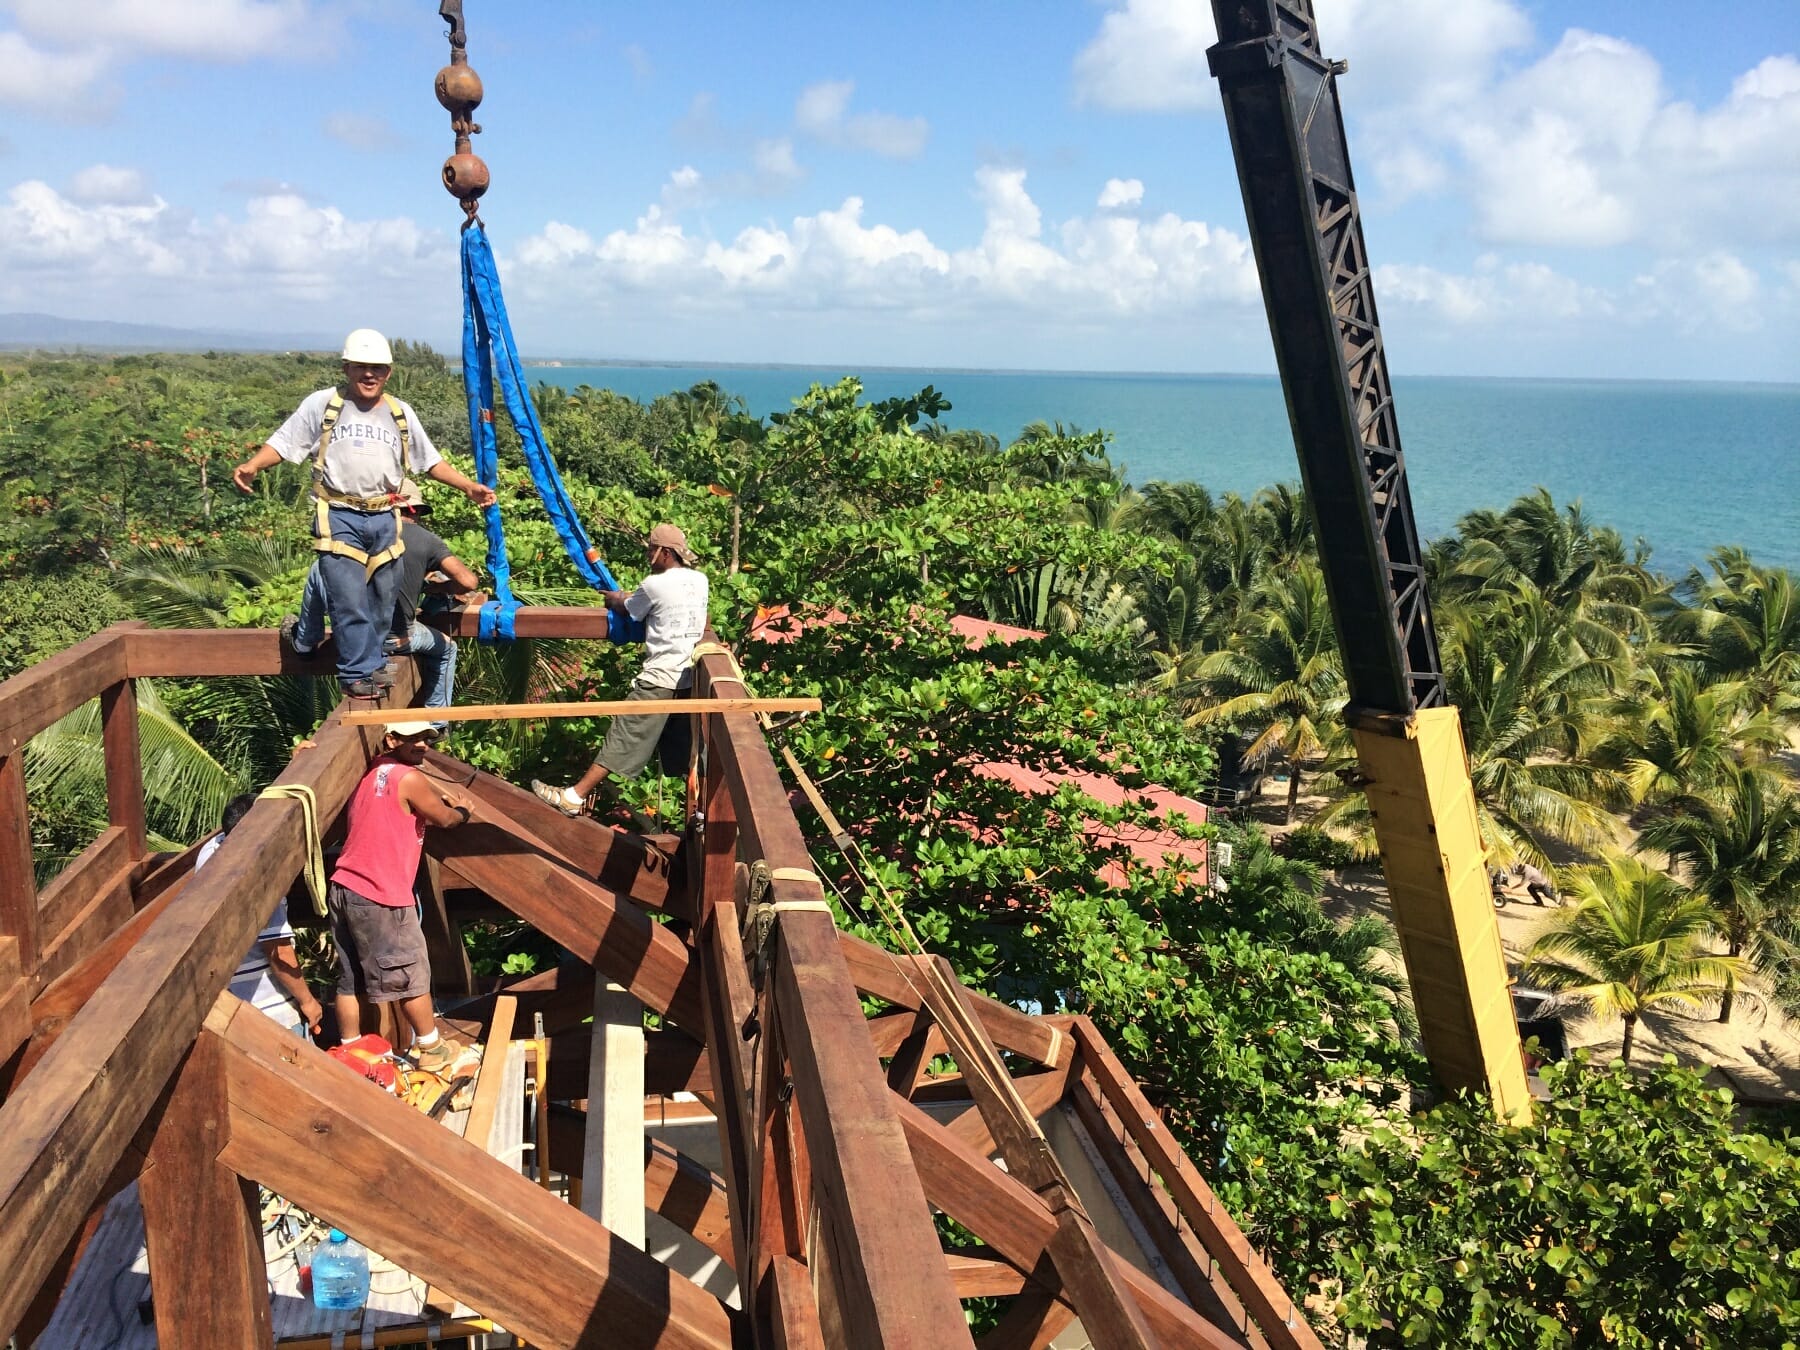 Erecting A Timber Frame In Belize